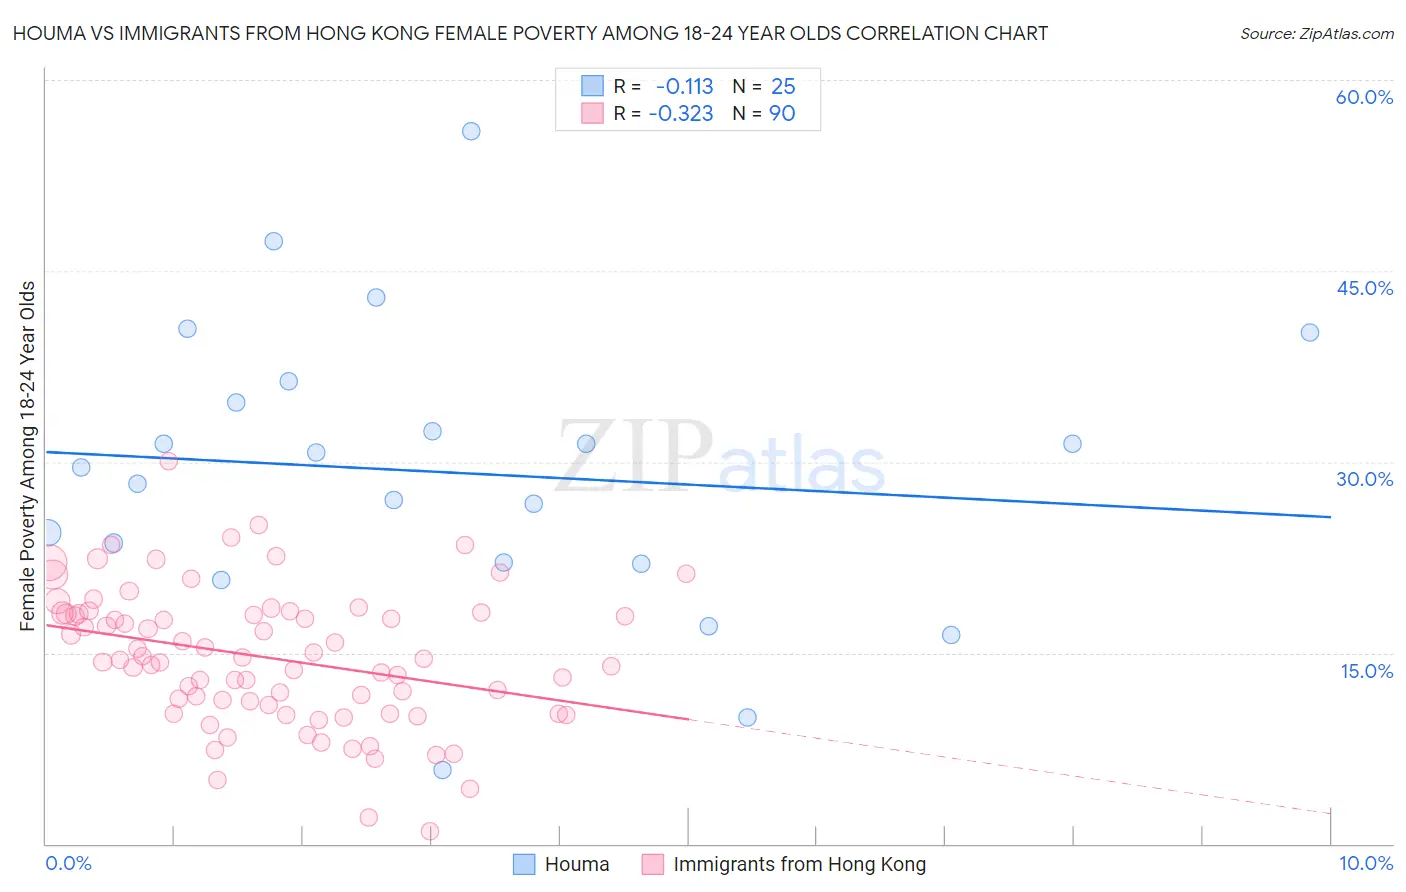 Houma vs Immigrants from Hong Kong Female Poverty Among 18-24 Year Olds